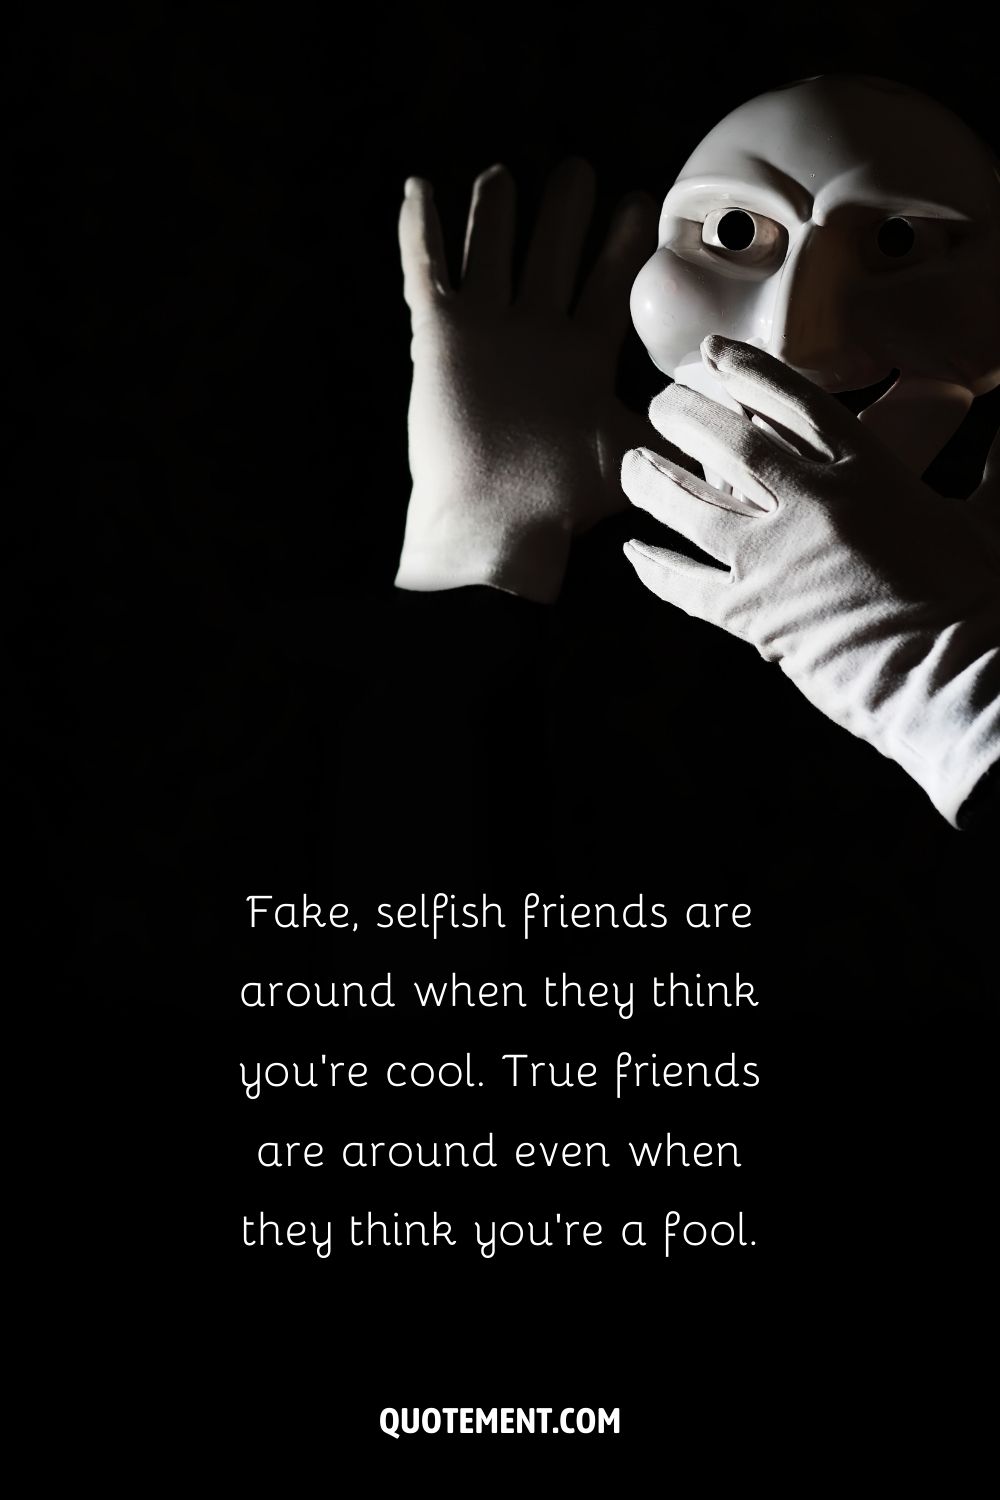 image of a white mask representing snake friends quote